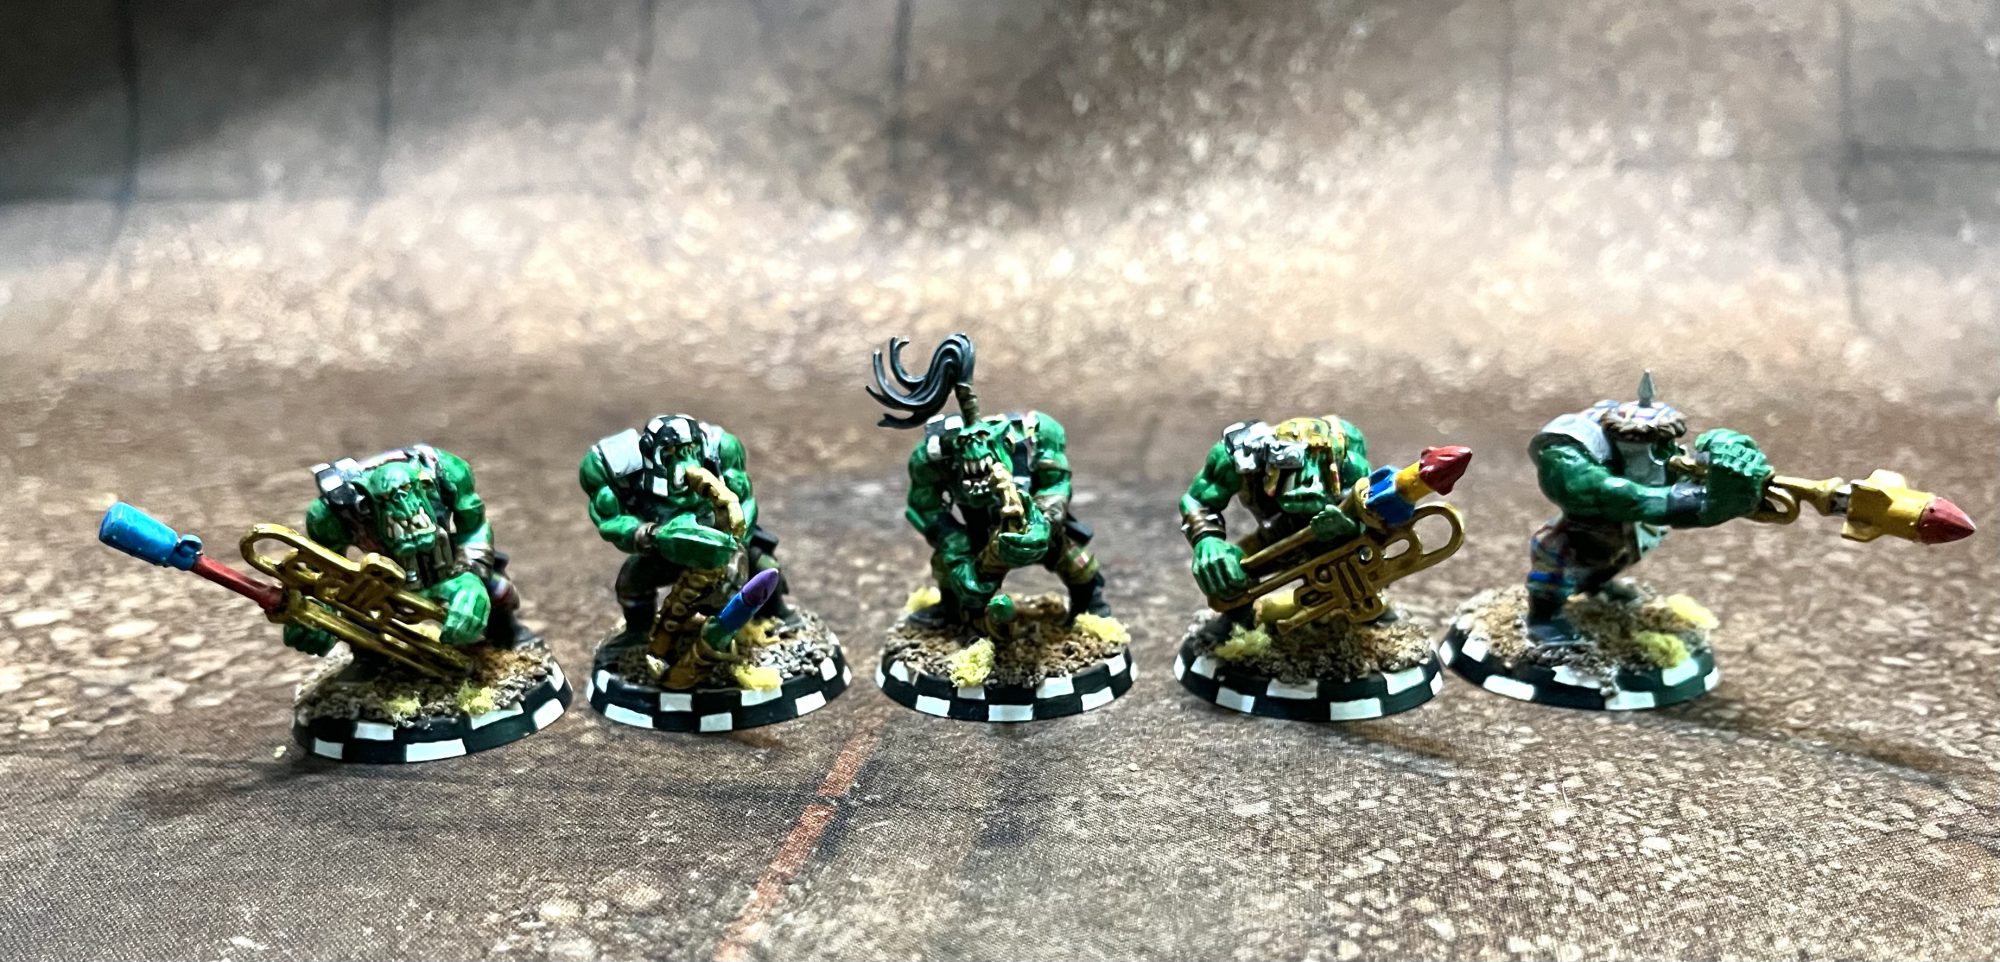 Five orks with musical instruments laden with explosives